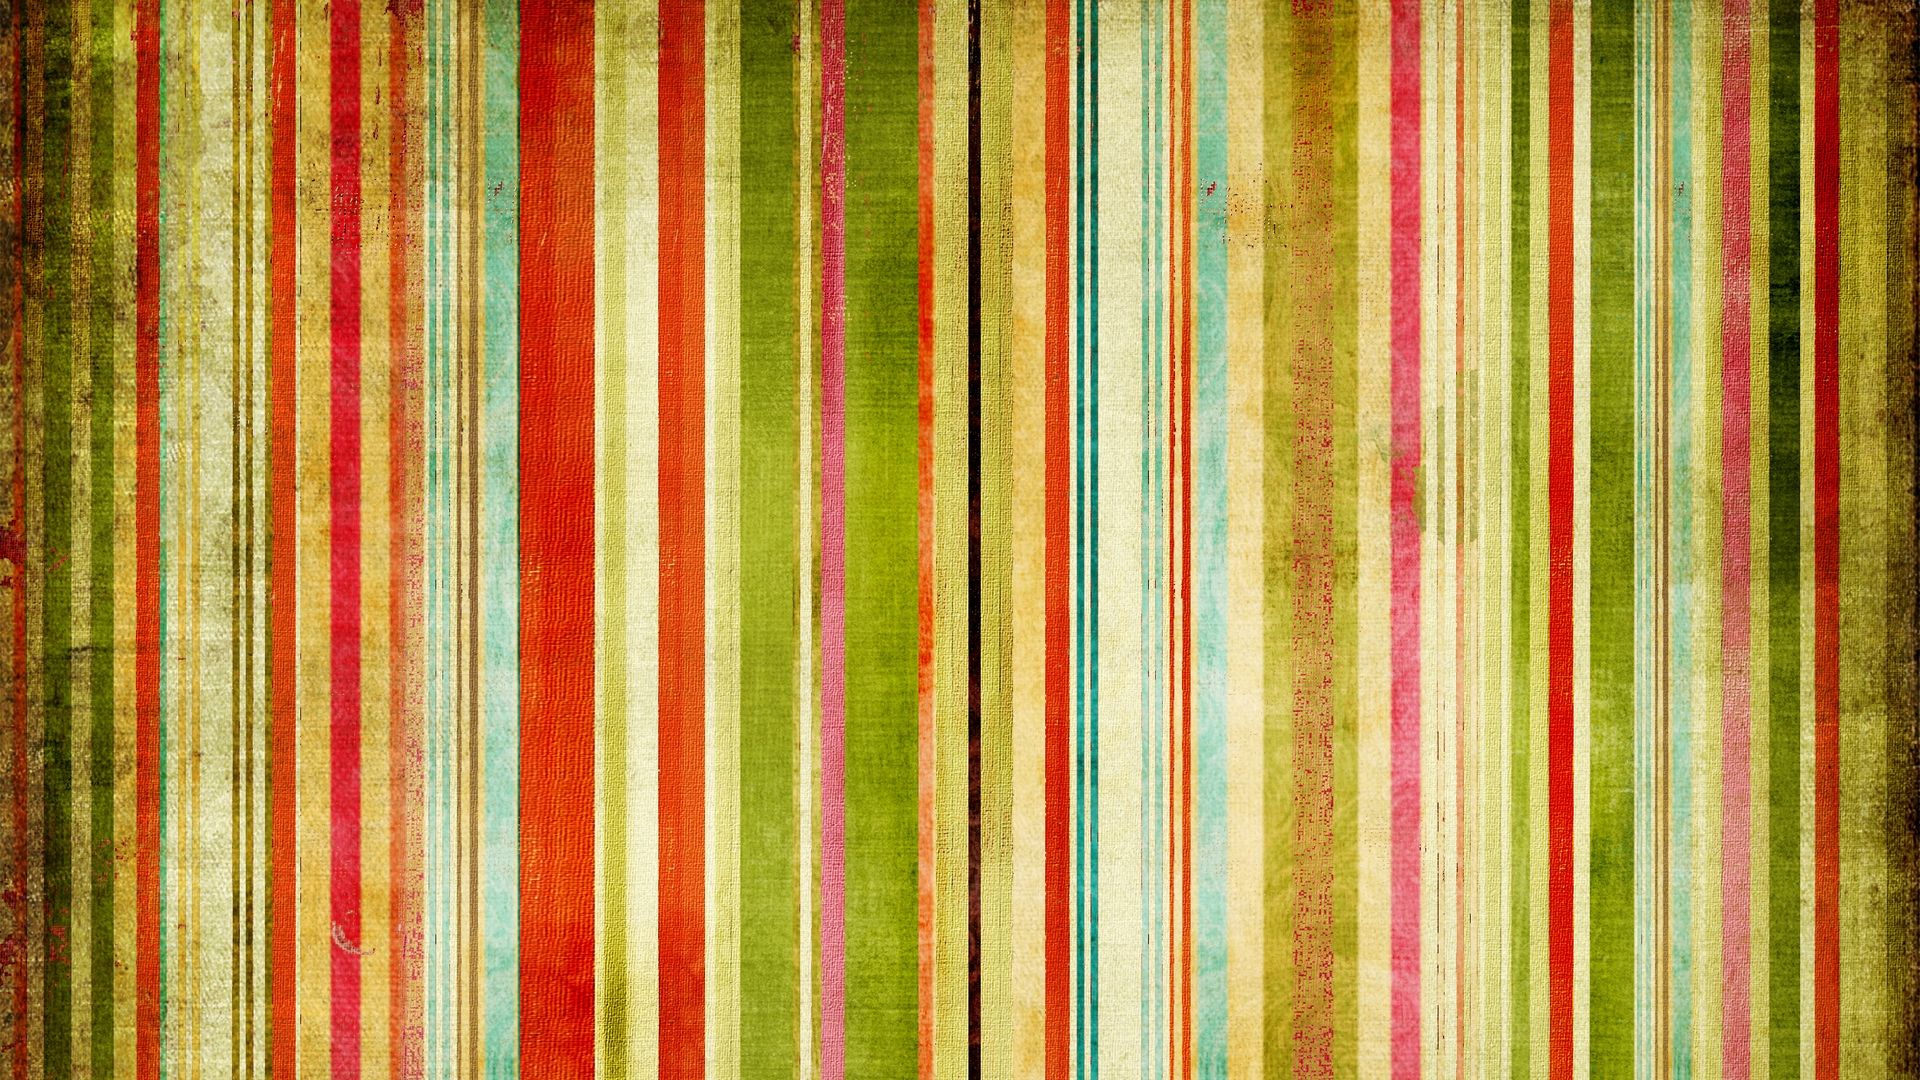 Colourful Grunge for 1920 x 1080 HDTV 1080p resolution